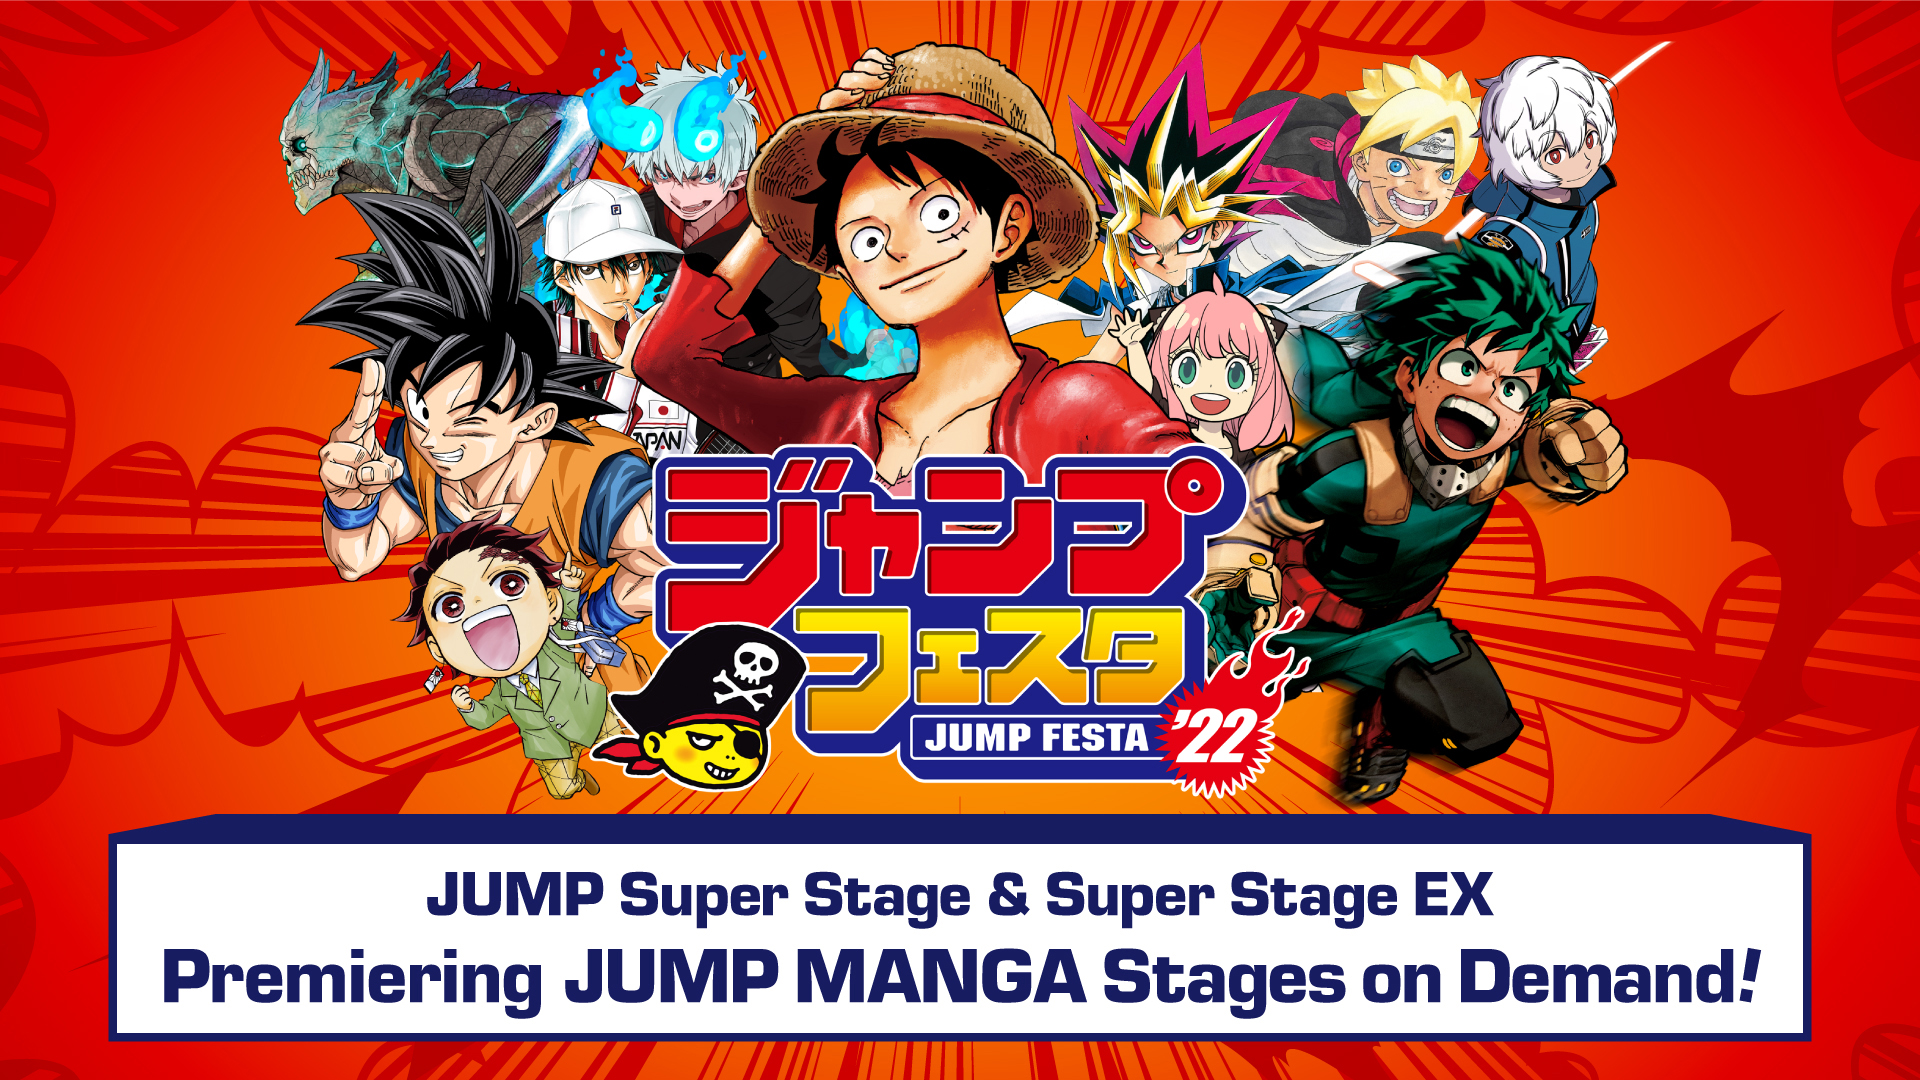 Key art for Jump Festa 2022 on demand. It features main characters from popular anime, including Luffy from 'One Piece' and Deku from 'My Hero Academia'